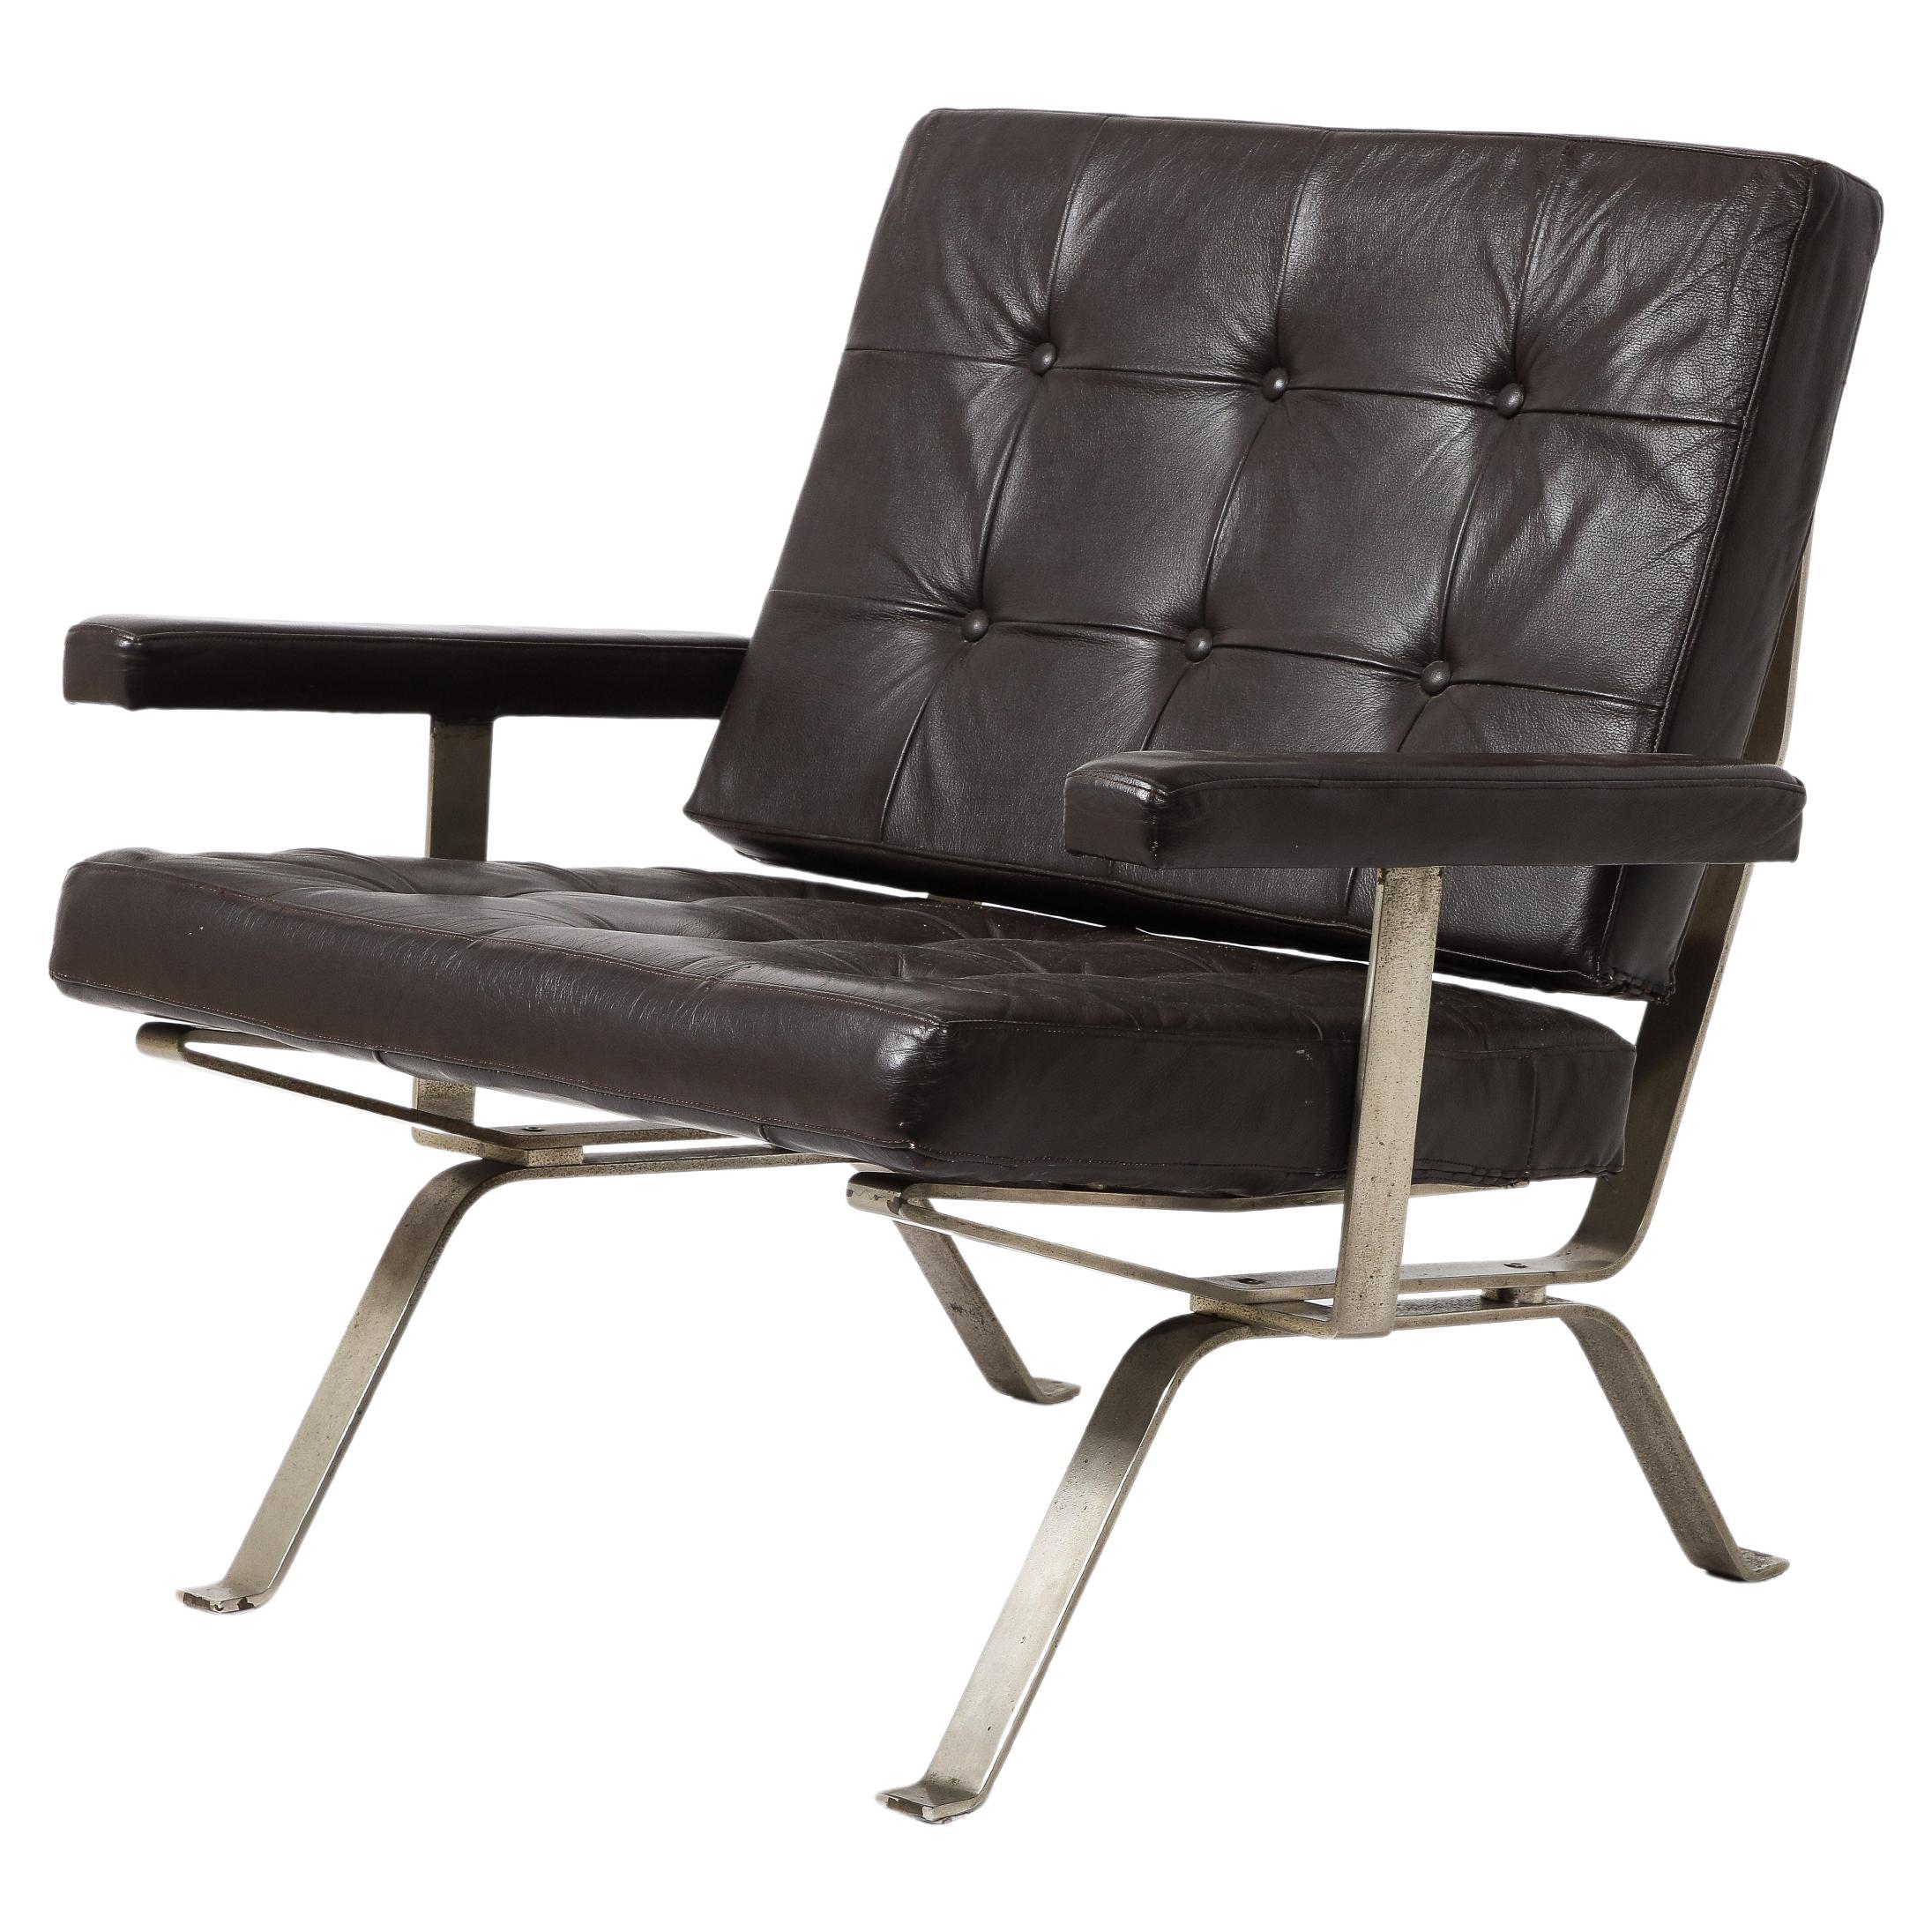 Bauhaus Style Visitor Lounge Chair in Black Leather, Germany 1960's For Sale